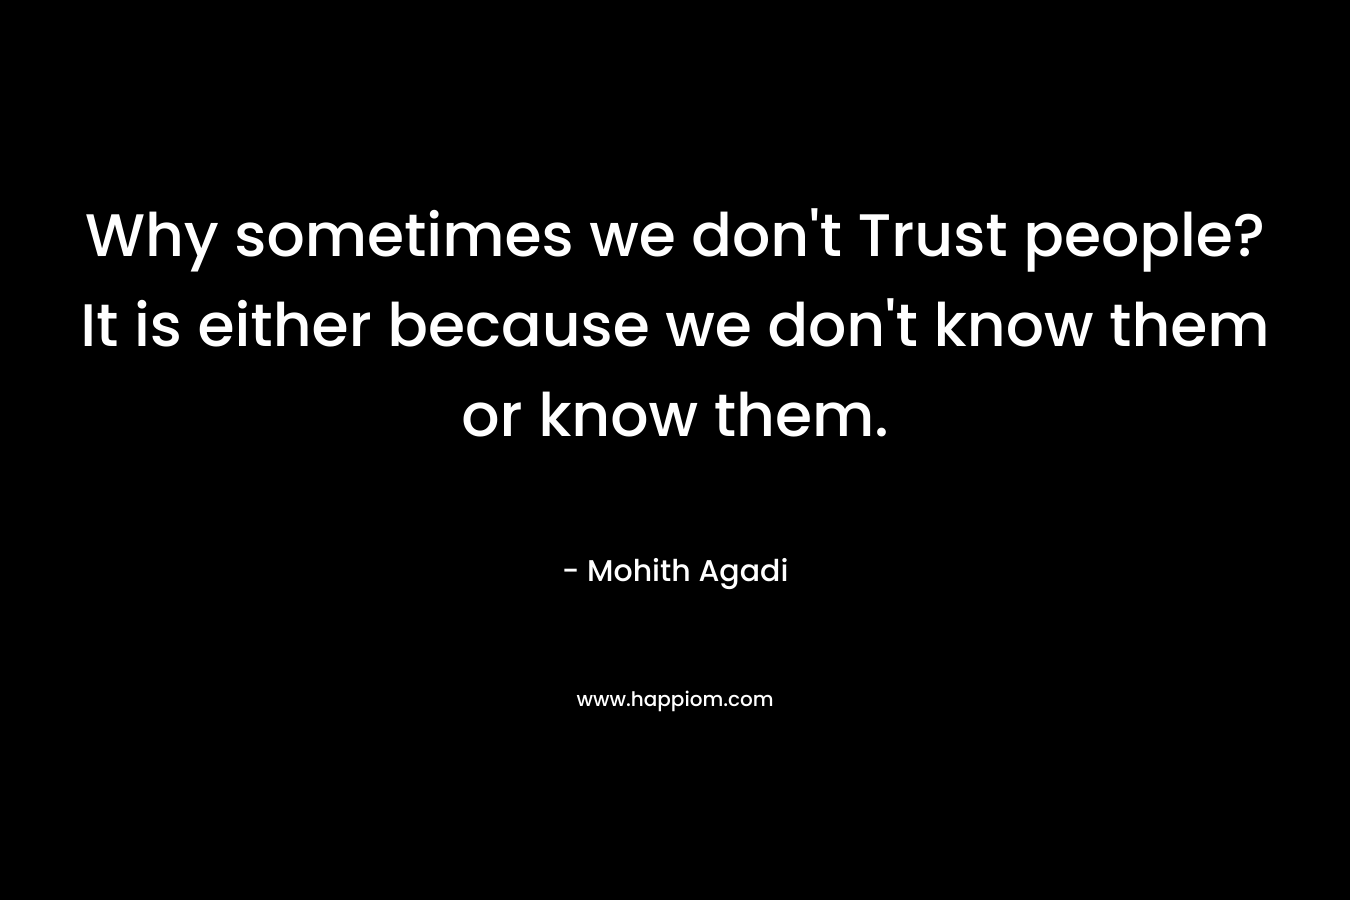 Why sometimes we don't Trust people? It is either because we don't know them or know them.